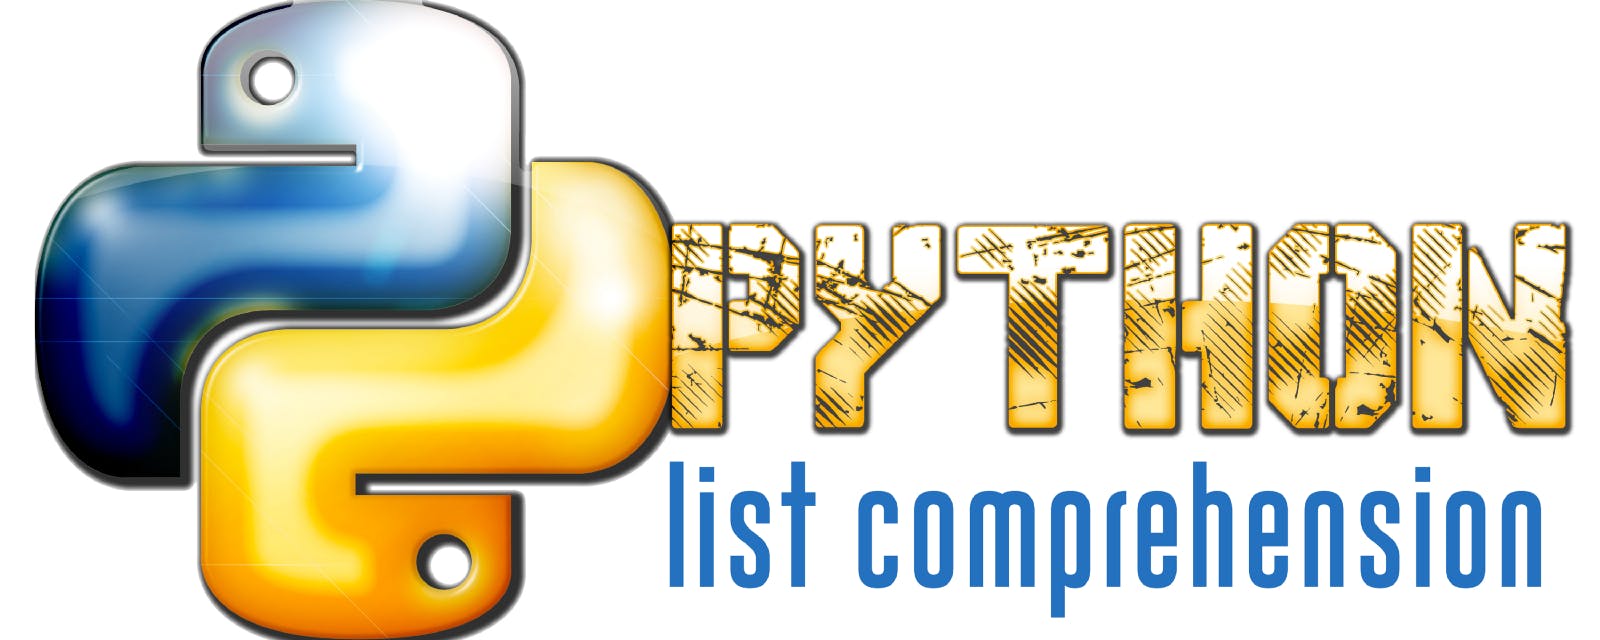 featured image - List Comprehension in Python